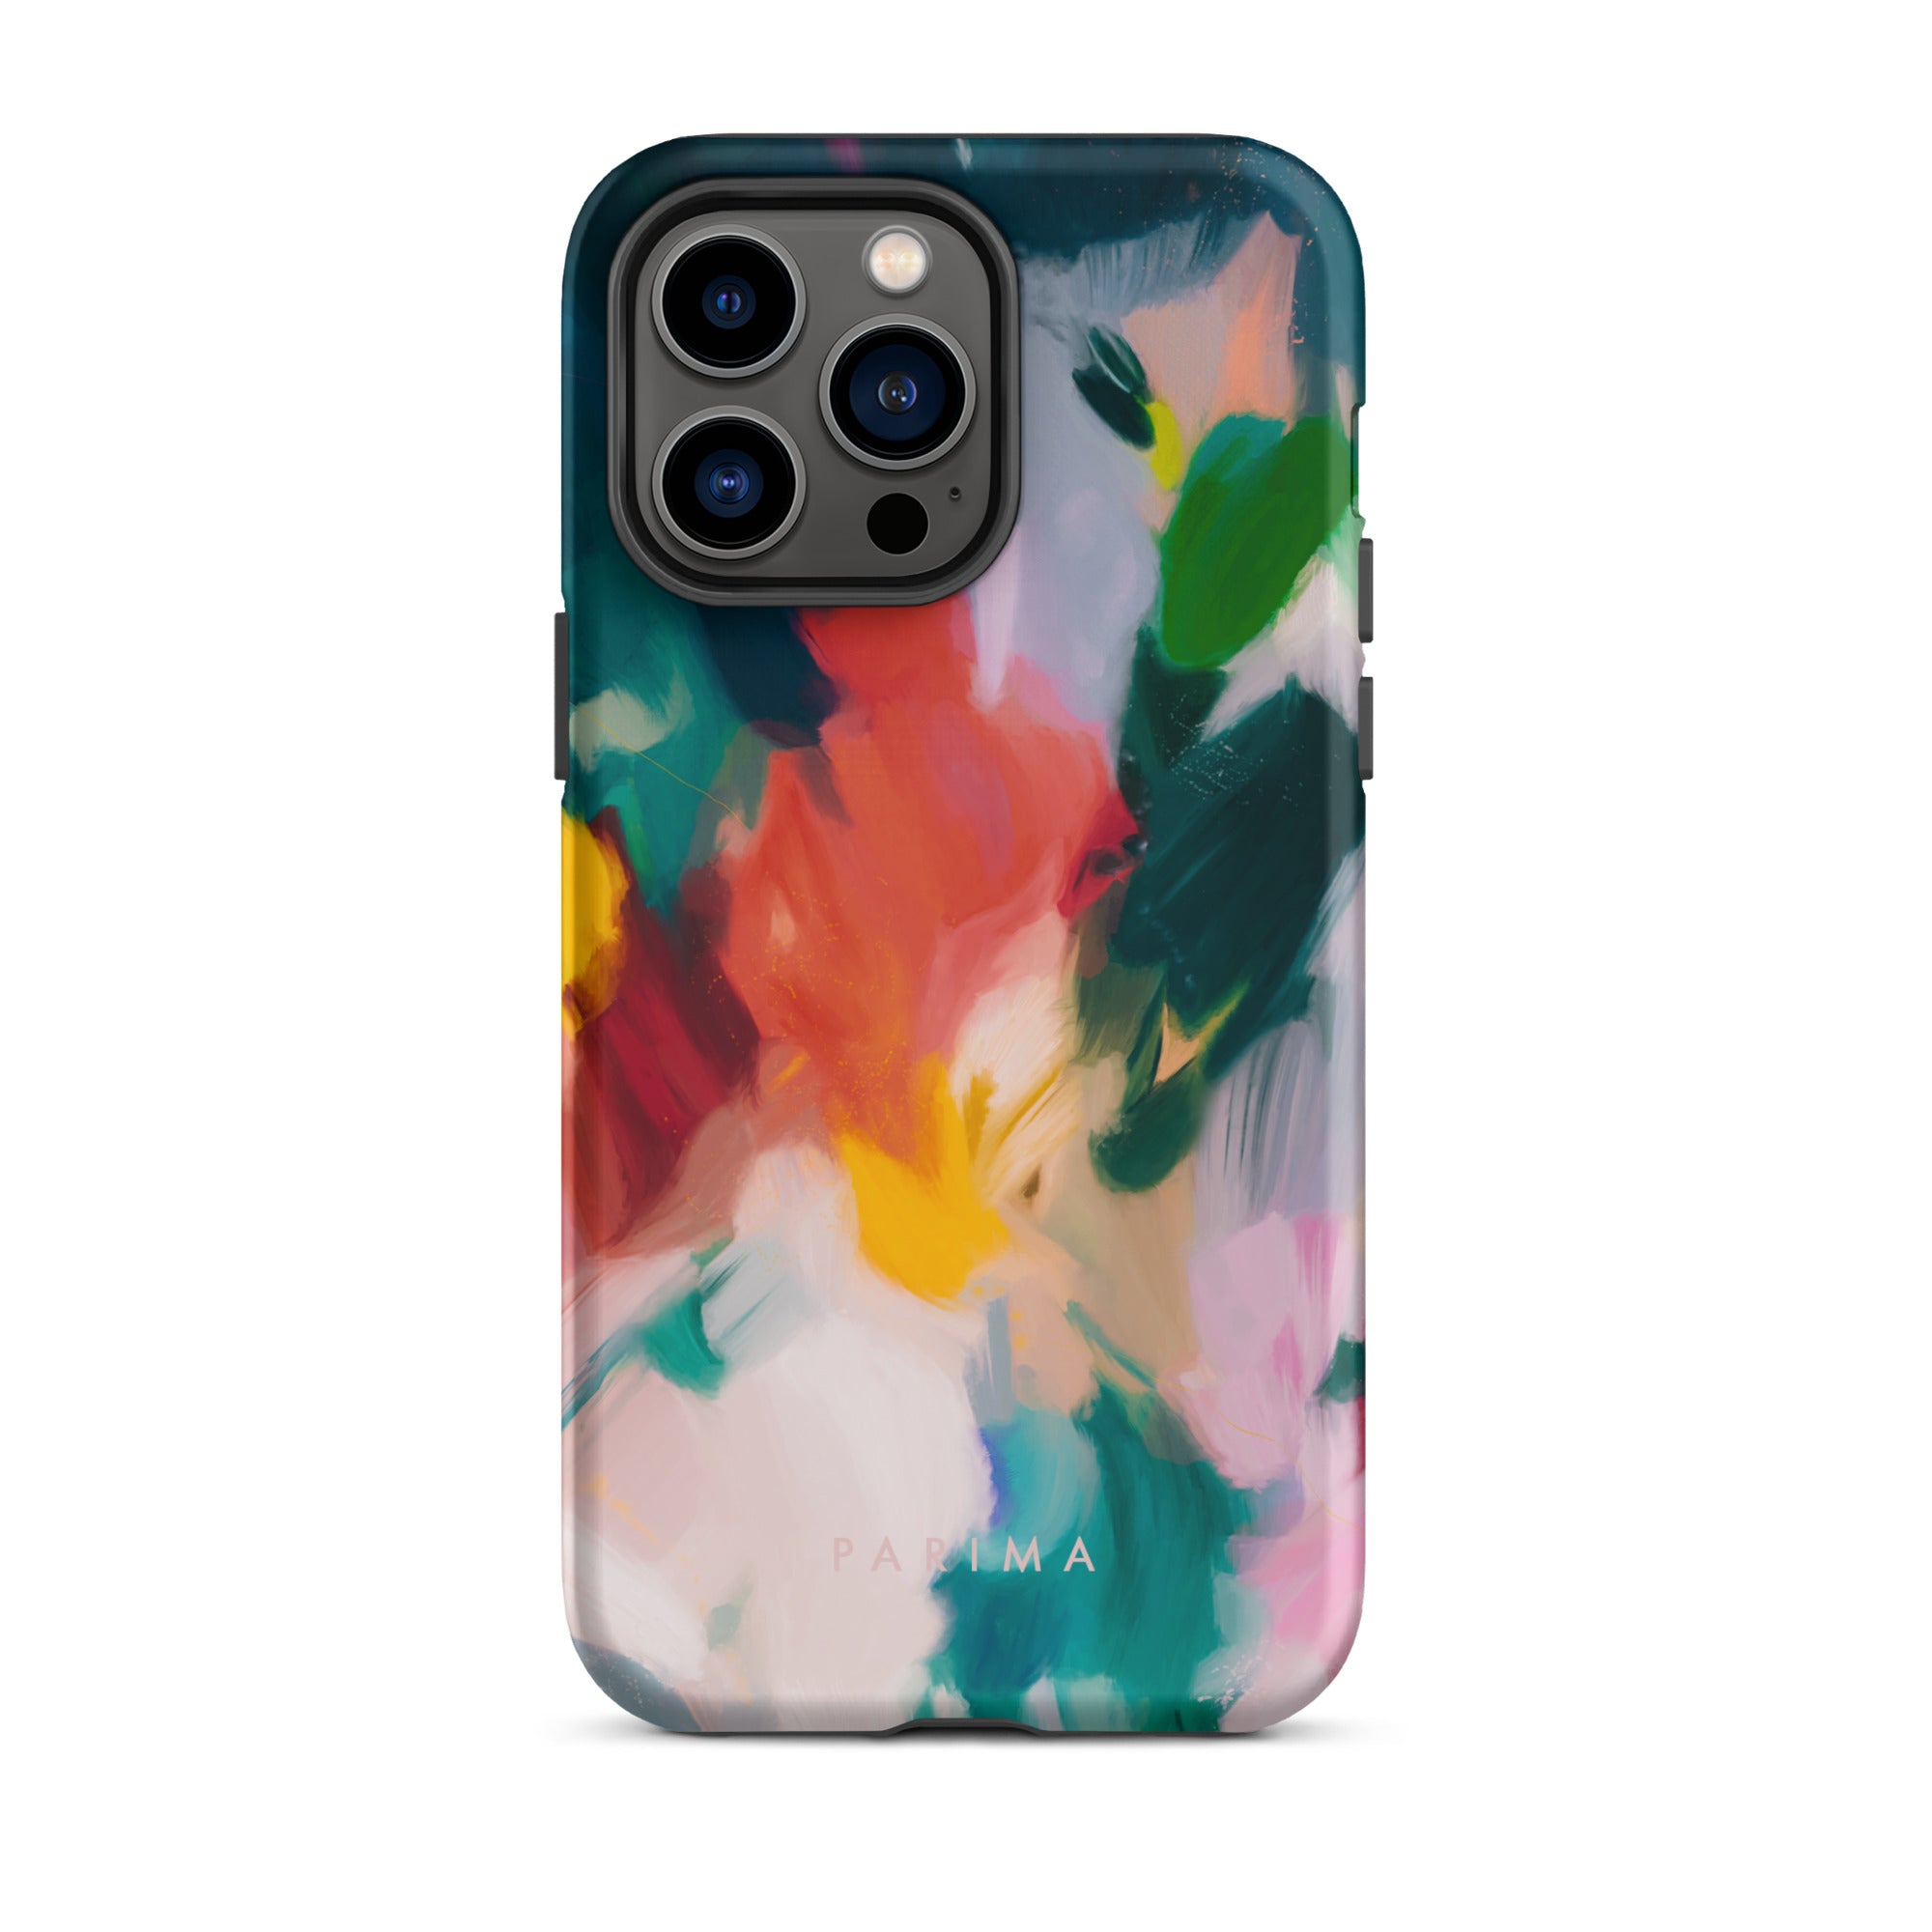 Pomme, blue and red abstract art on iPhone 14 Pro Max tough case by Parima Studio